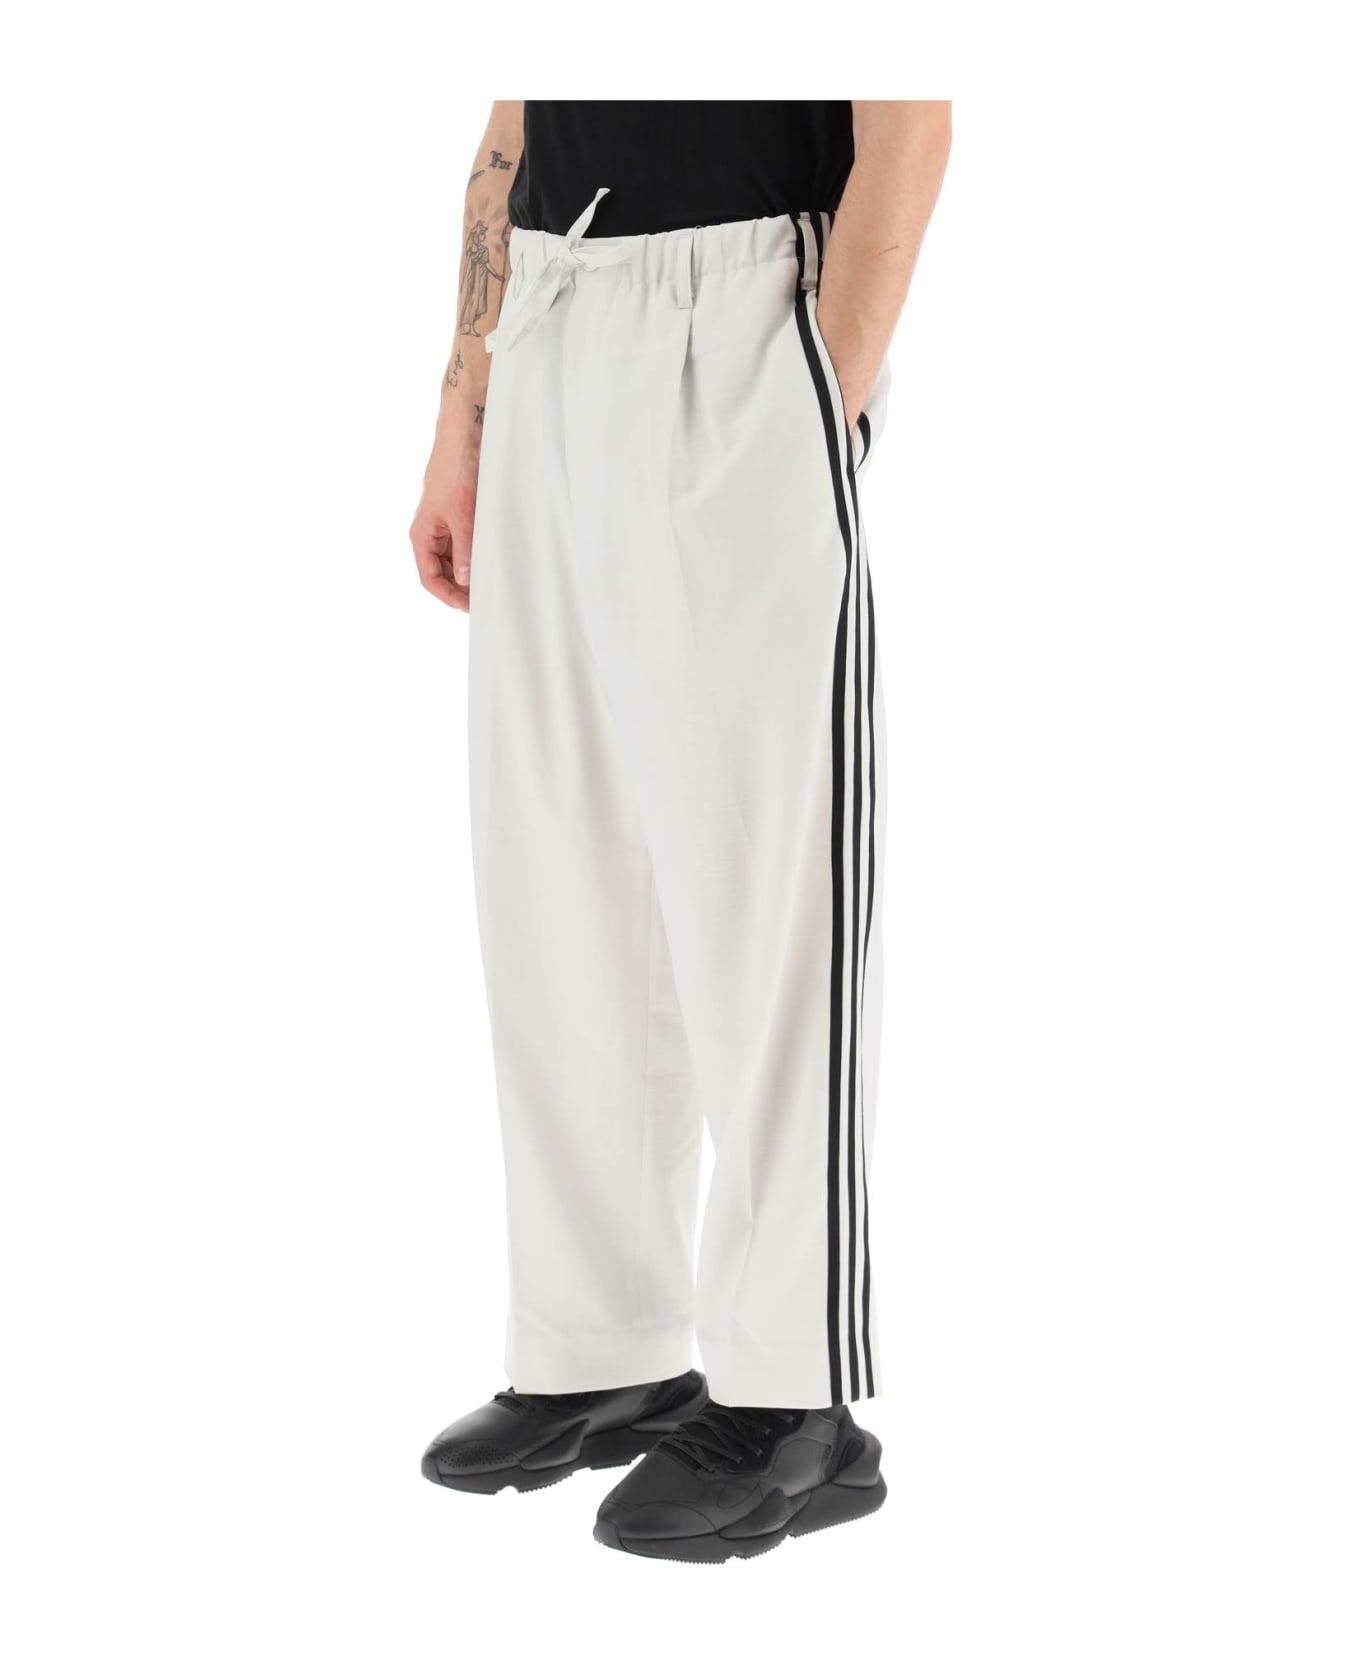 Y-3 Lightweight Twill Pants With Side Stripes - ORBIT GREY (White)